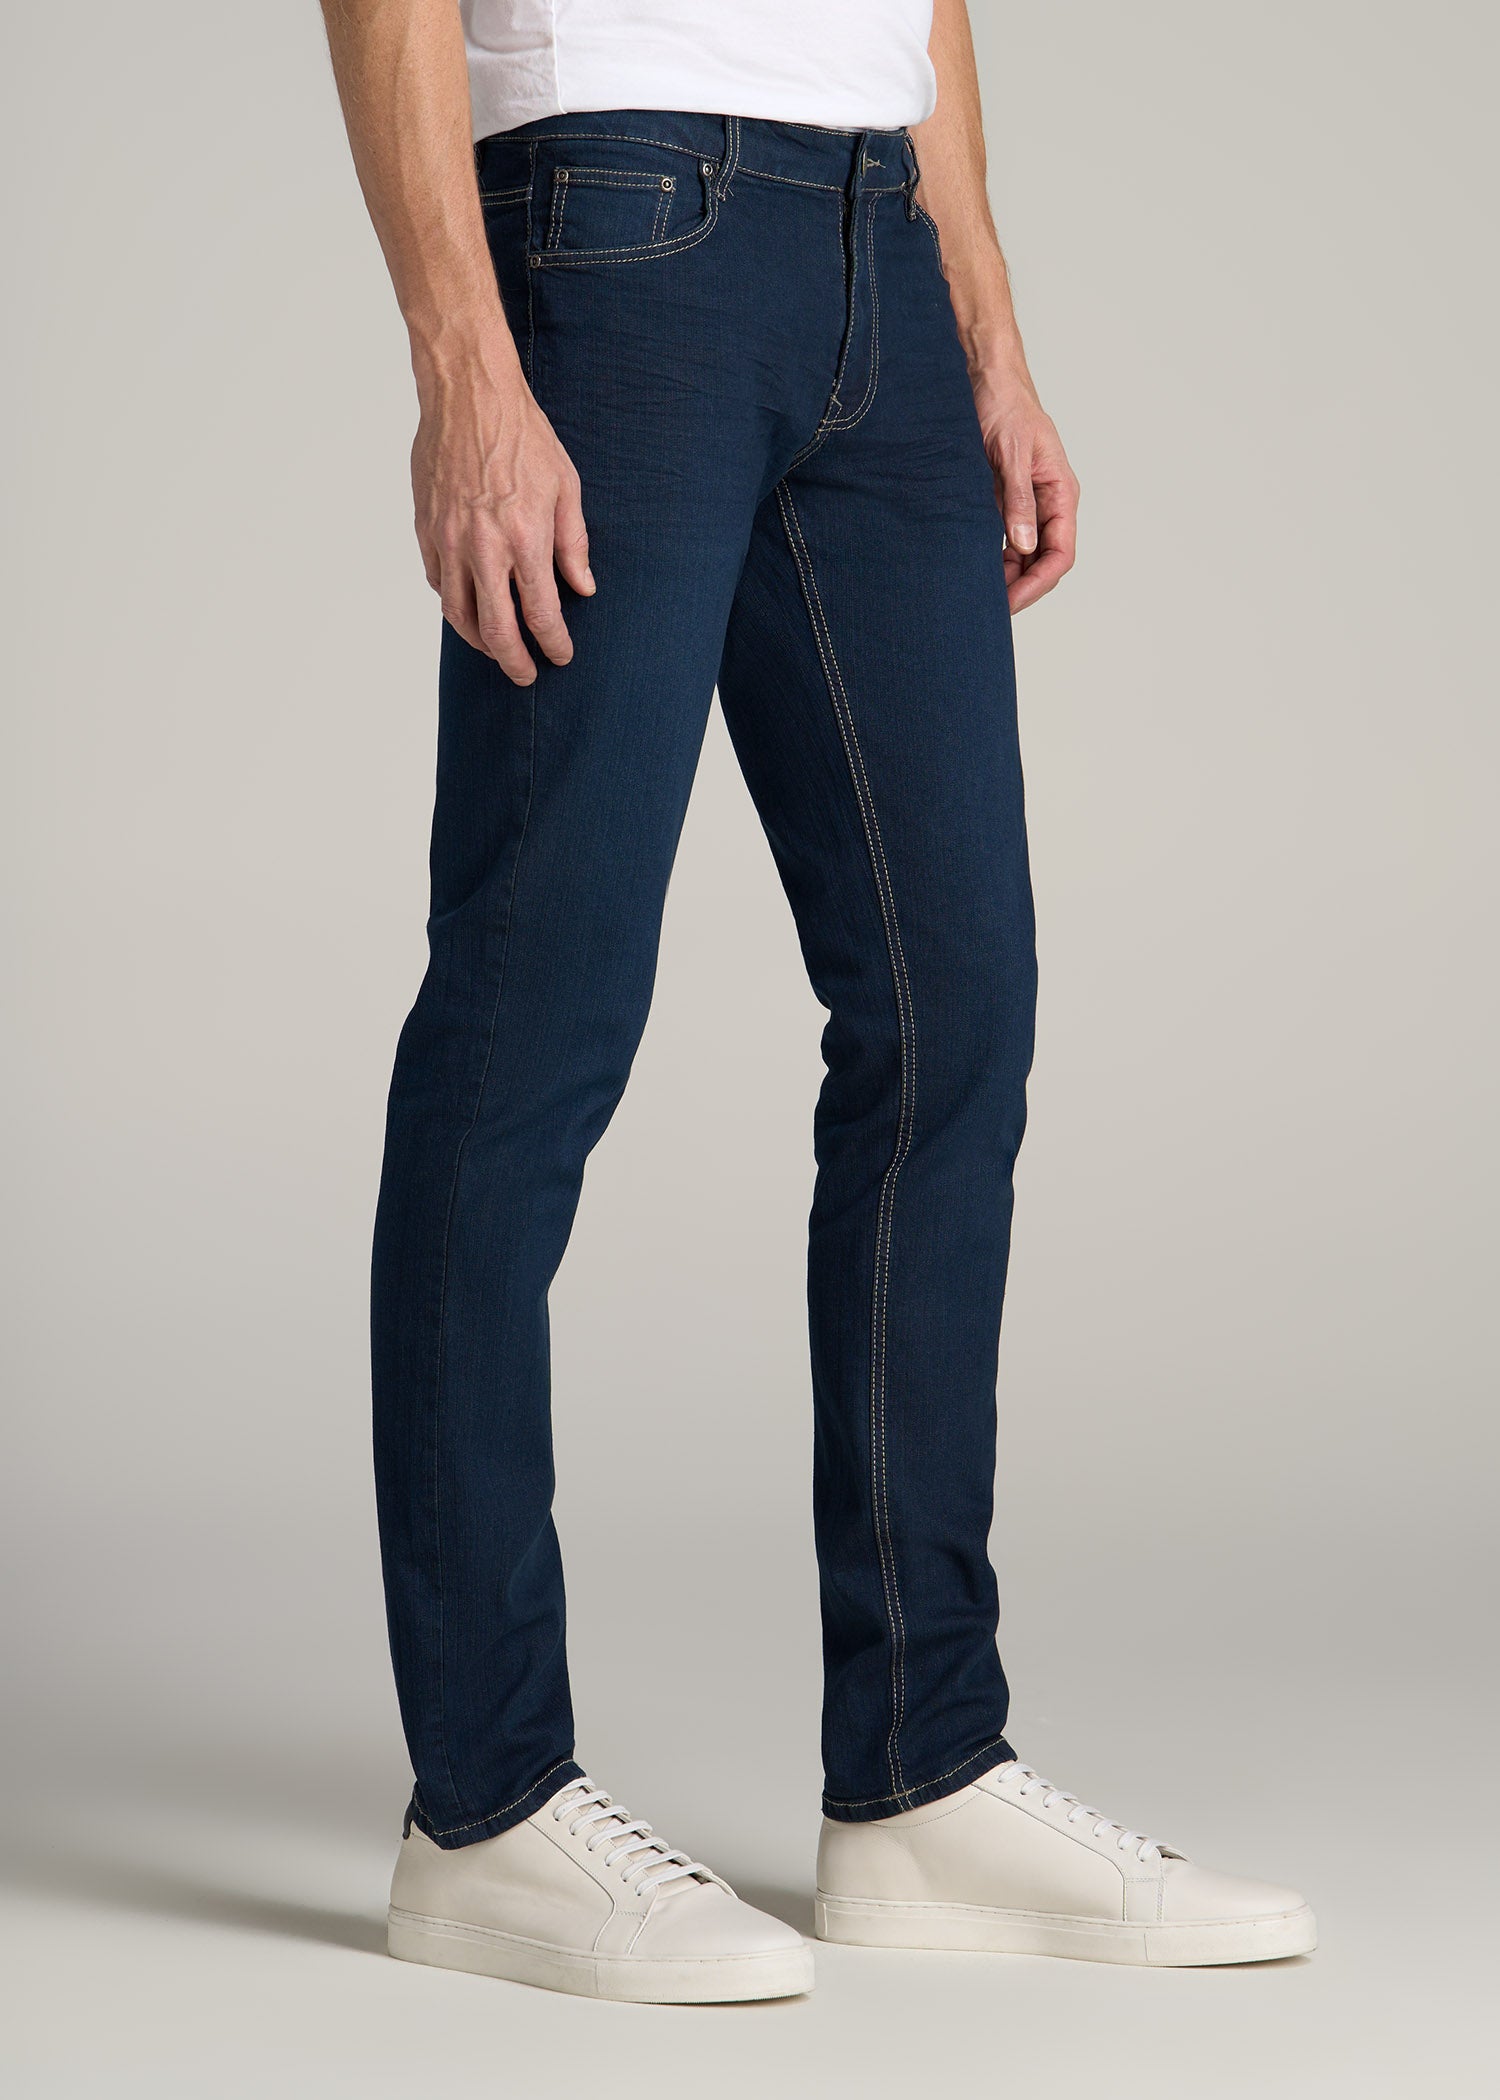 Carman Tapered Jeans For Tall Men Blue-Steel